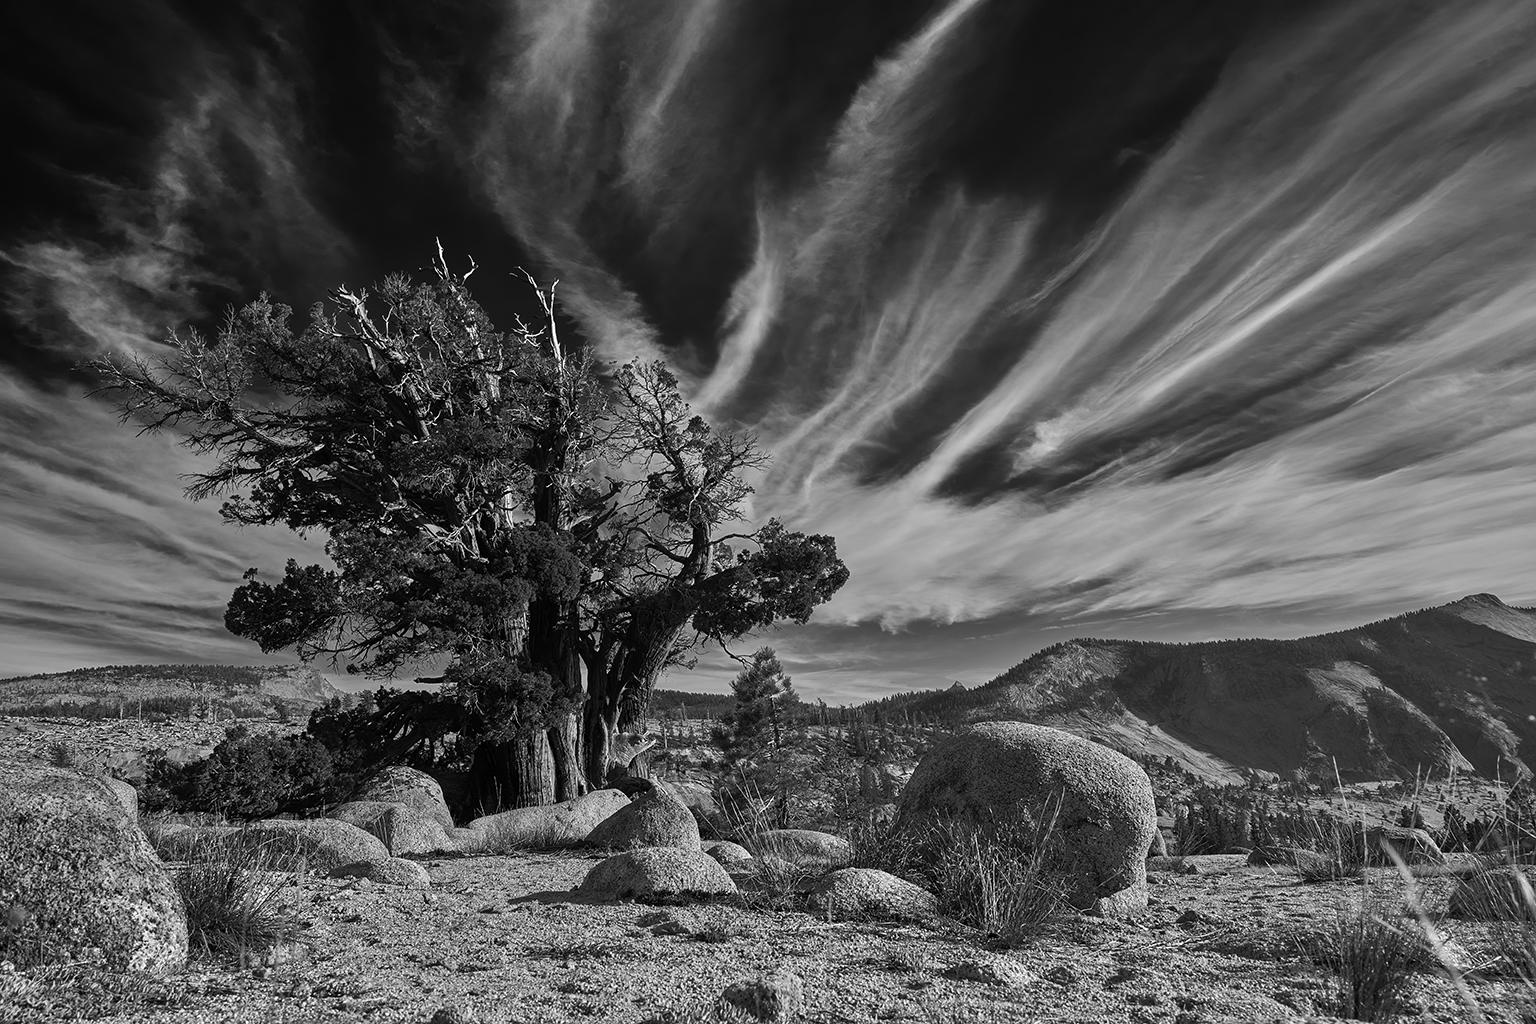 Tree Study III - large format b/w photograph of lone ancient tree in landscape